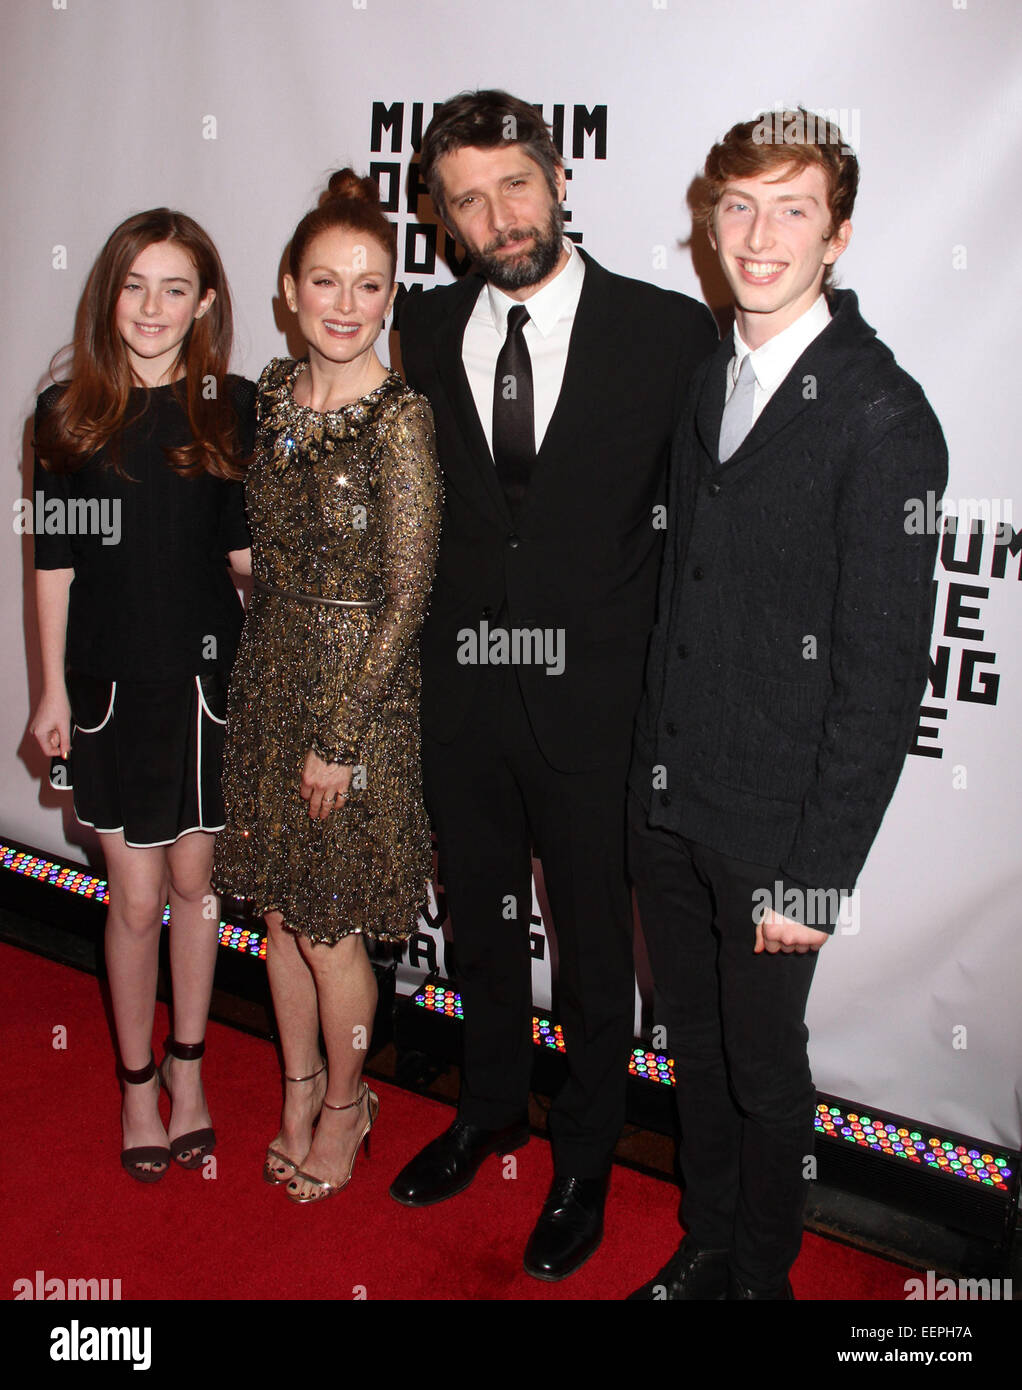 New York, New York, USA. 20th Jan, 2015. LIV FREUNDLICH, JULIANNE MOORE, CALEB FREUNDLICH and BART FREUNDLICH attend the Museum of Moving Images Salute to Julianne Moore held at 583 Park at 63rd Street. Credit:  Nancy Kaszerman/ZUMAPRESS.com/Alamy Live News Stock Photo